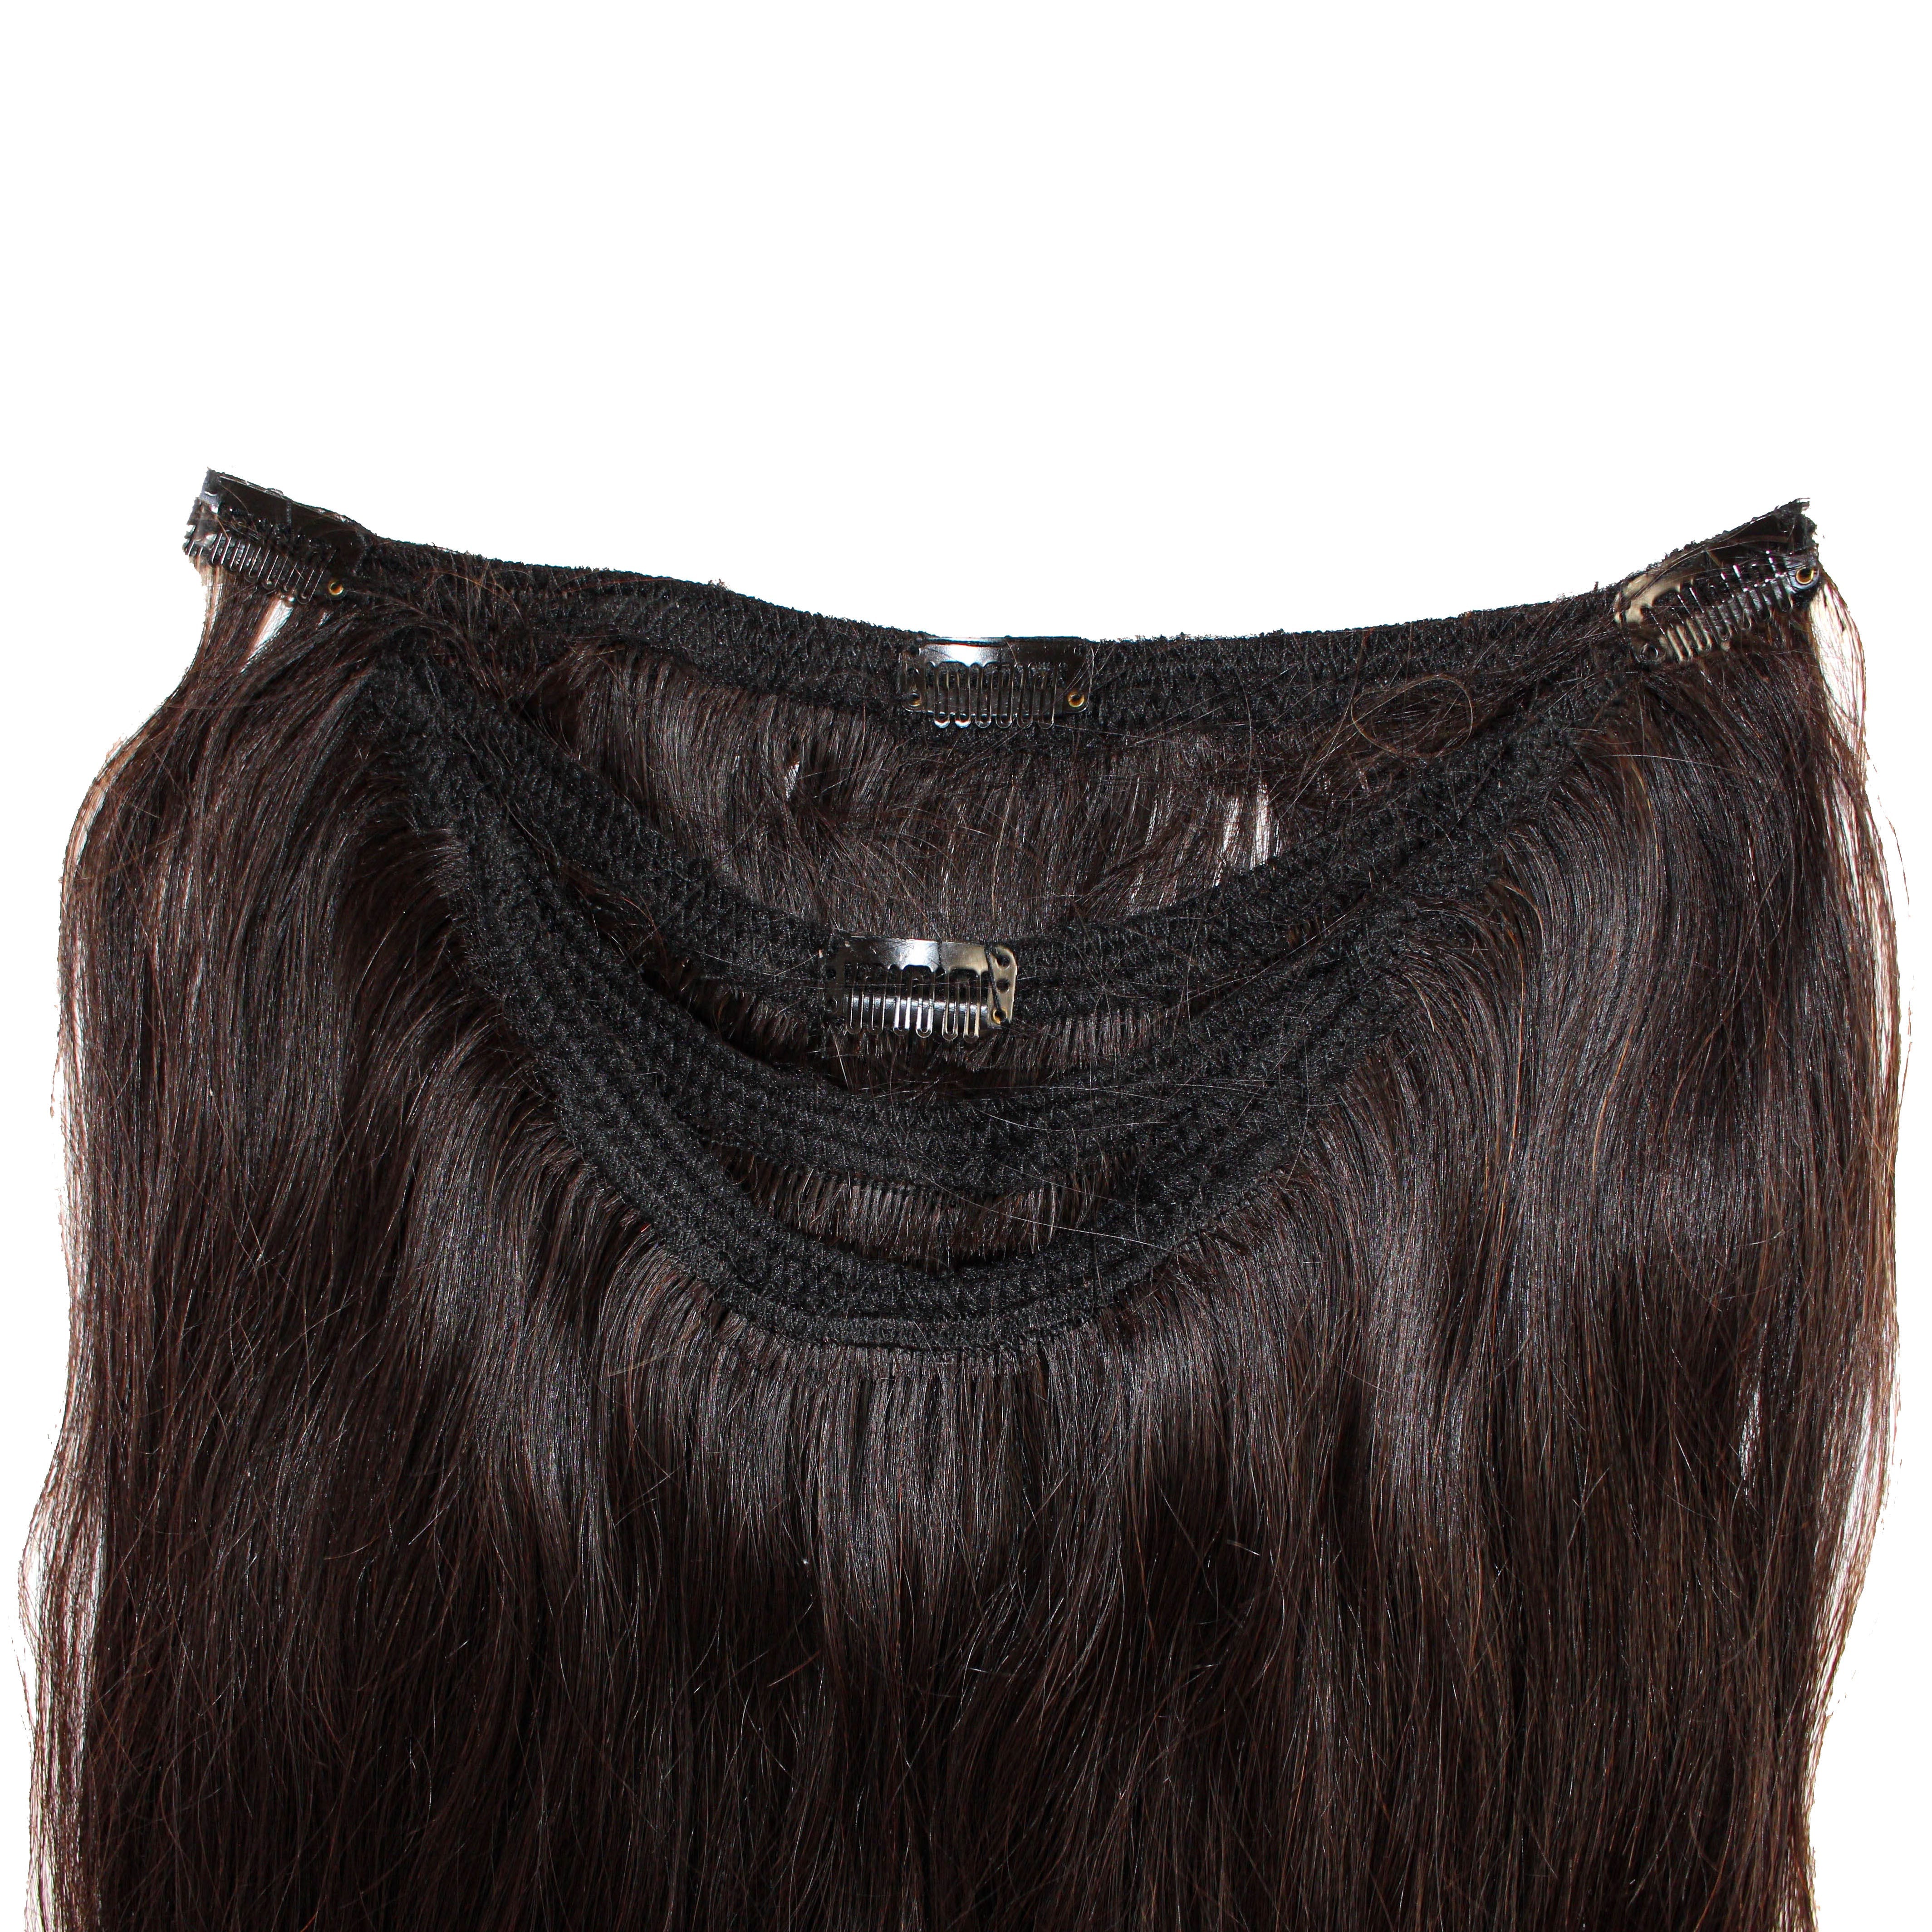 Clip-ins hair extension piece. Natural color hair wefted with four clips. 